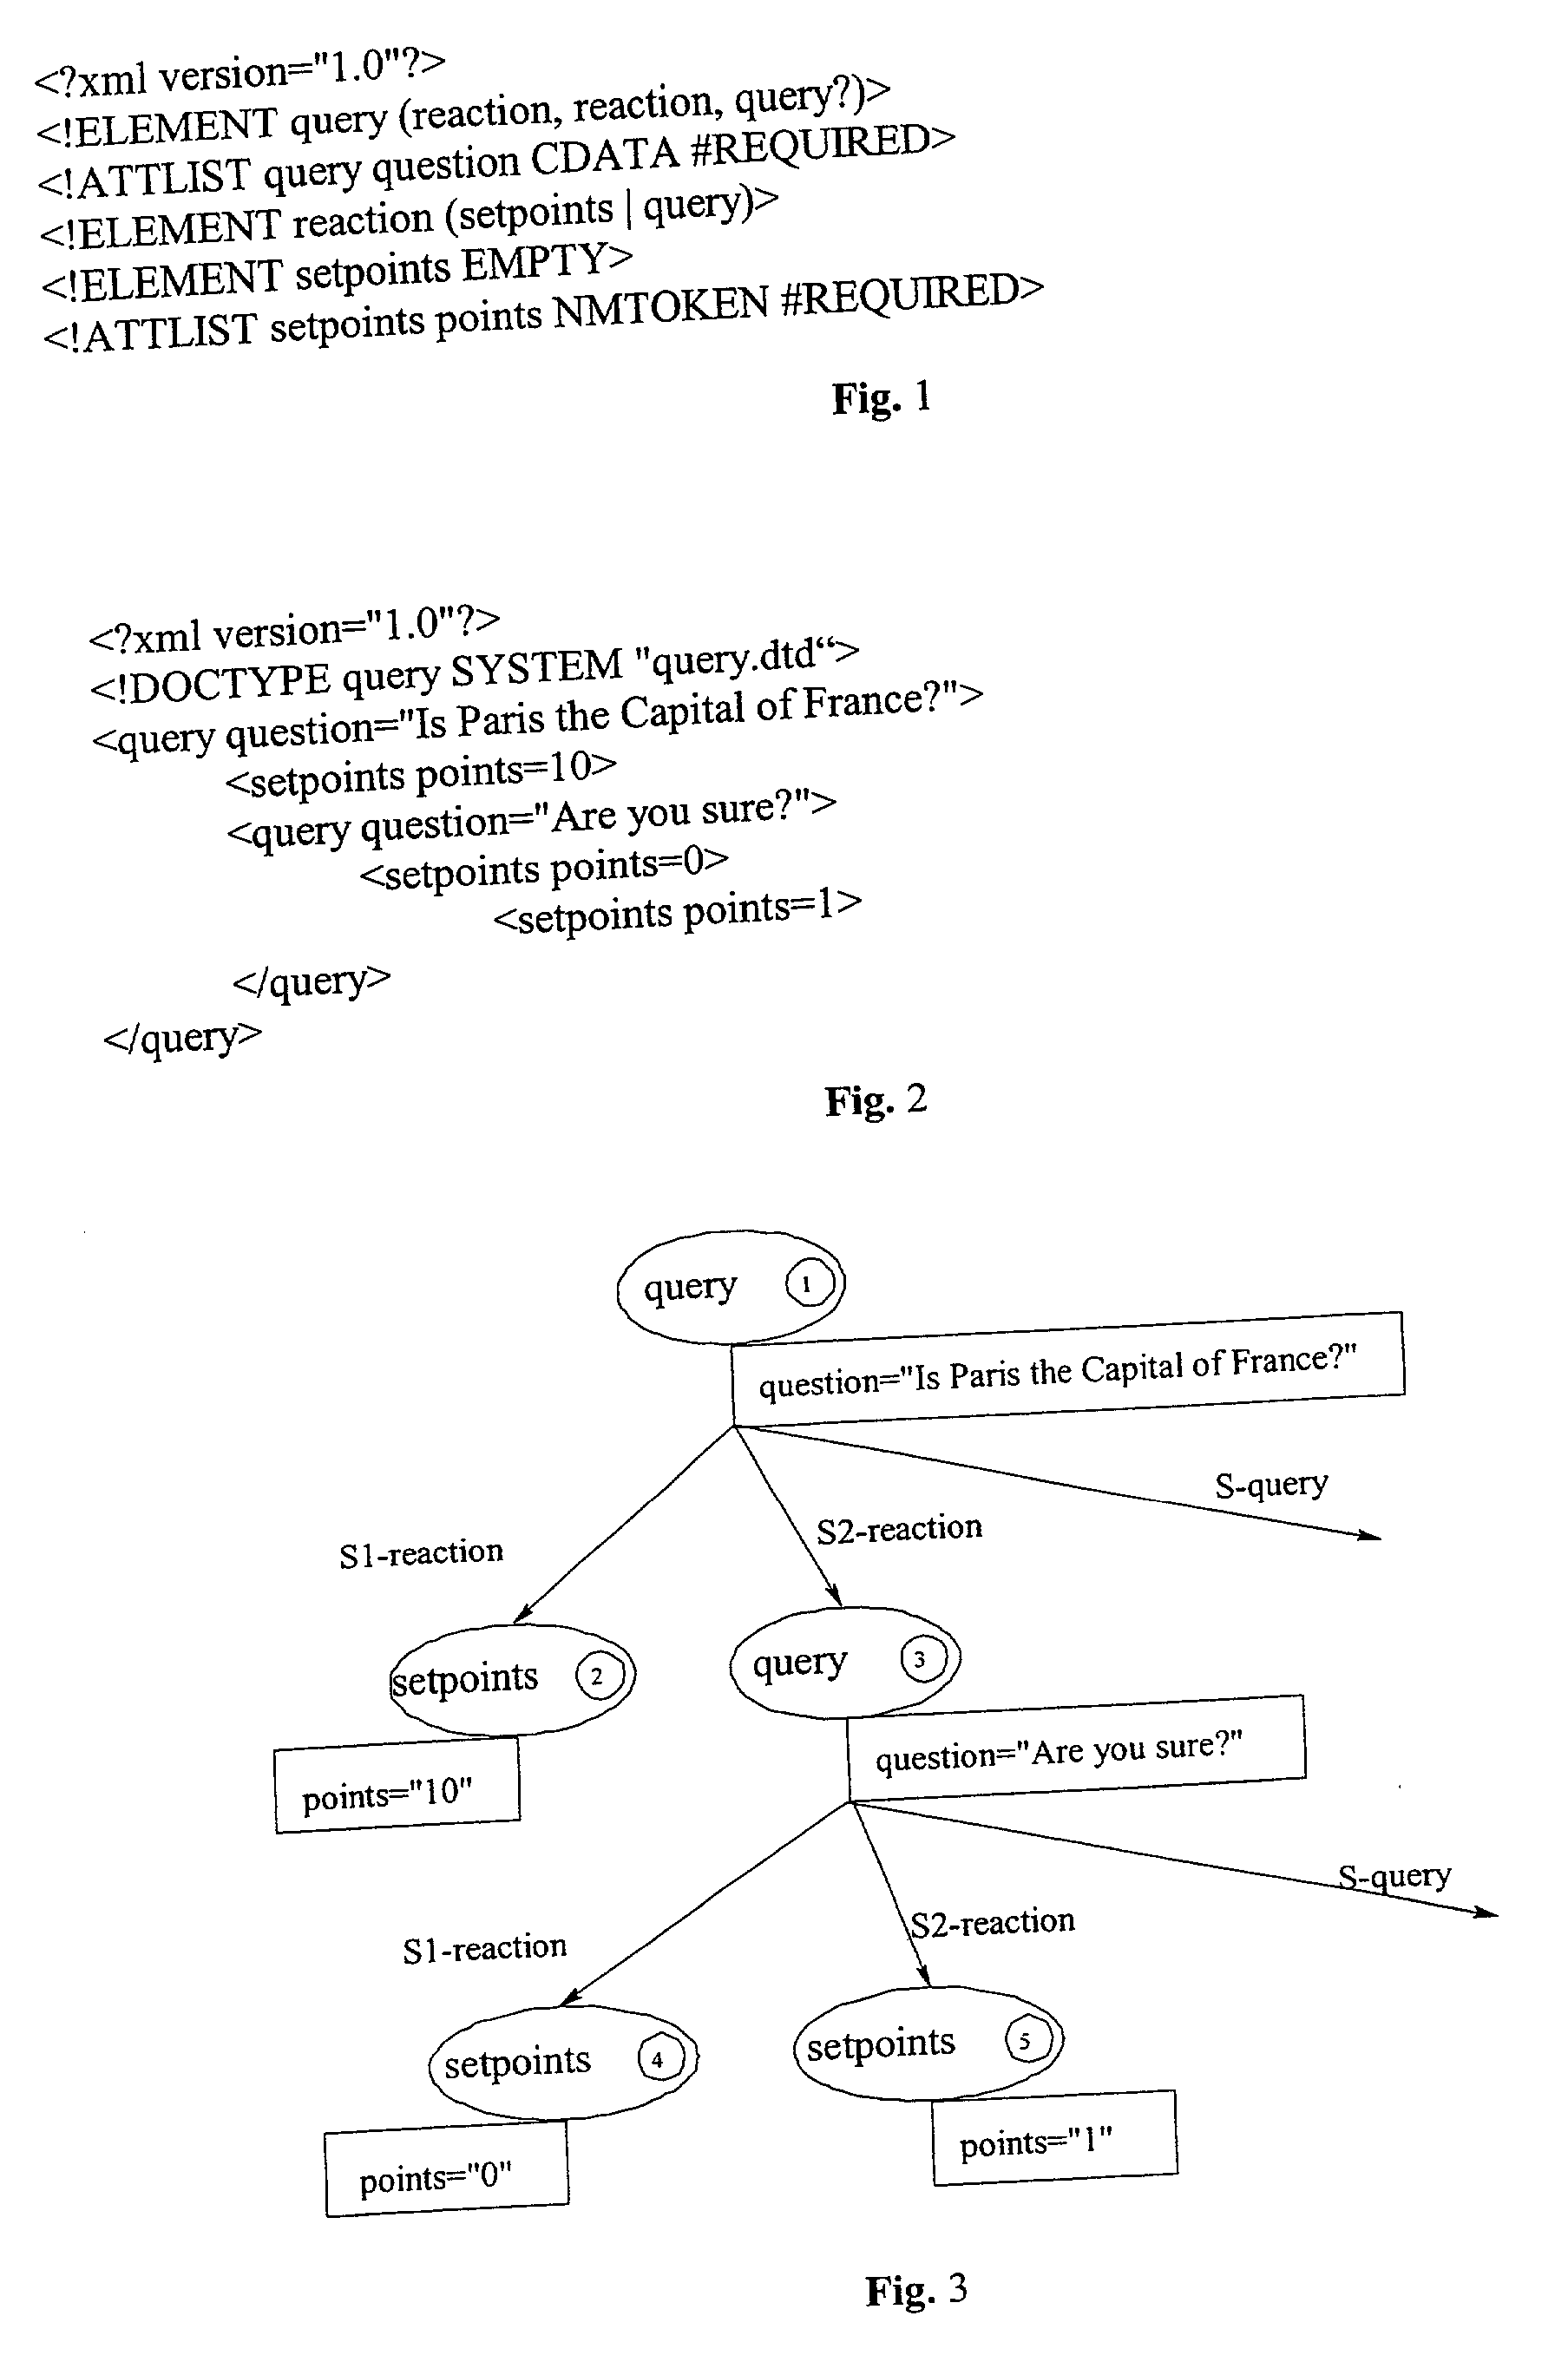 Methods and systems for direct execution of XML documents